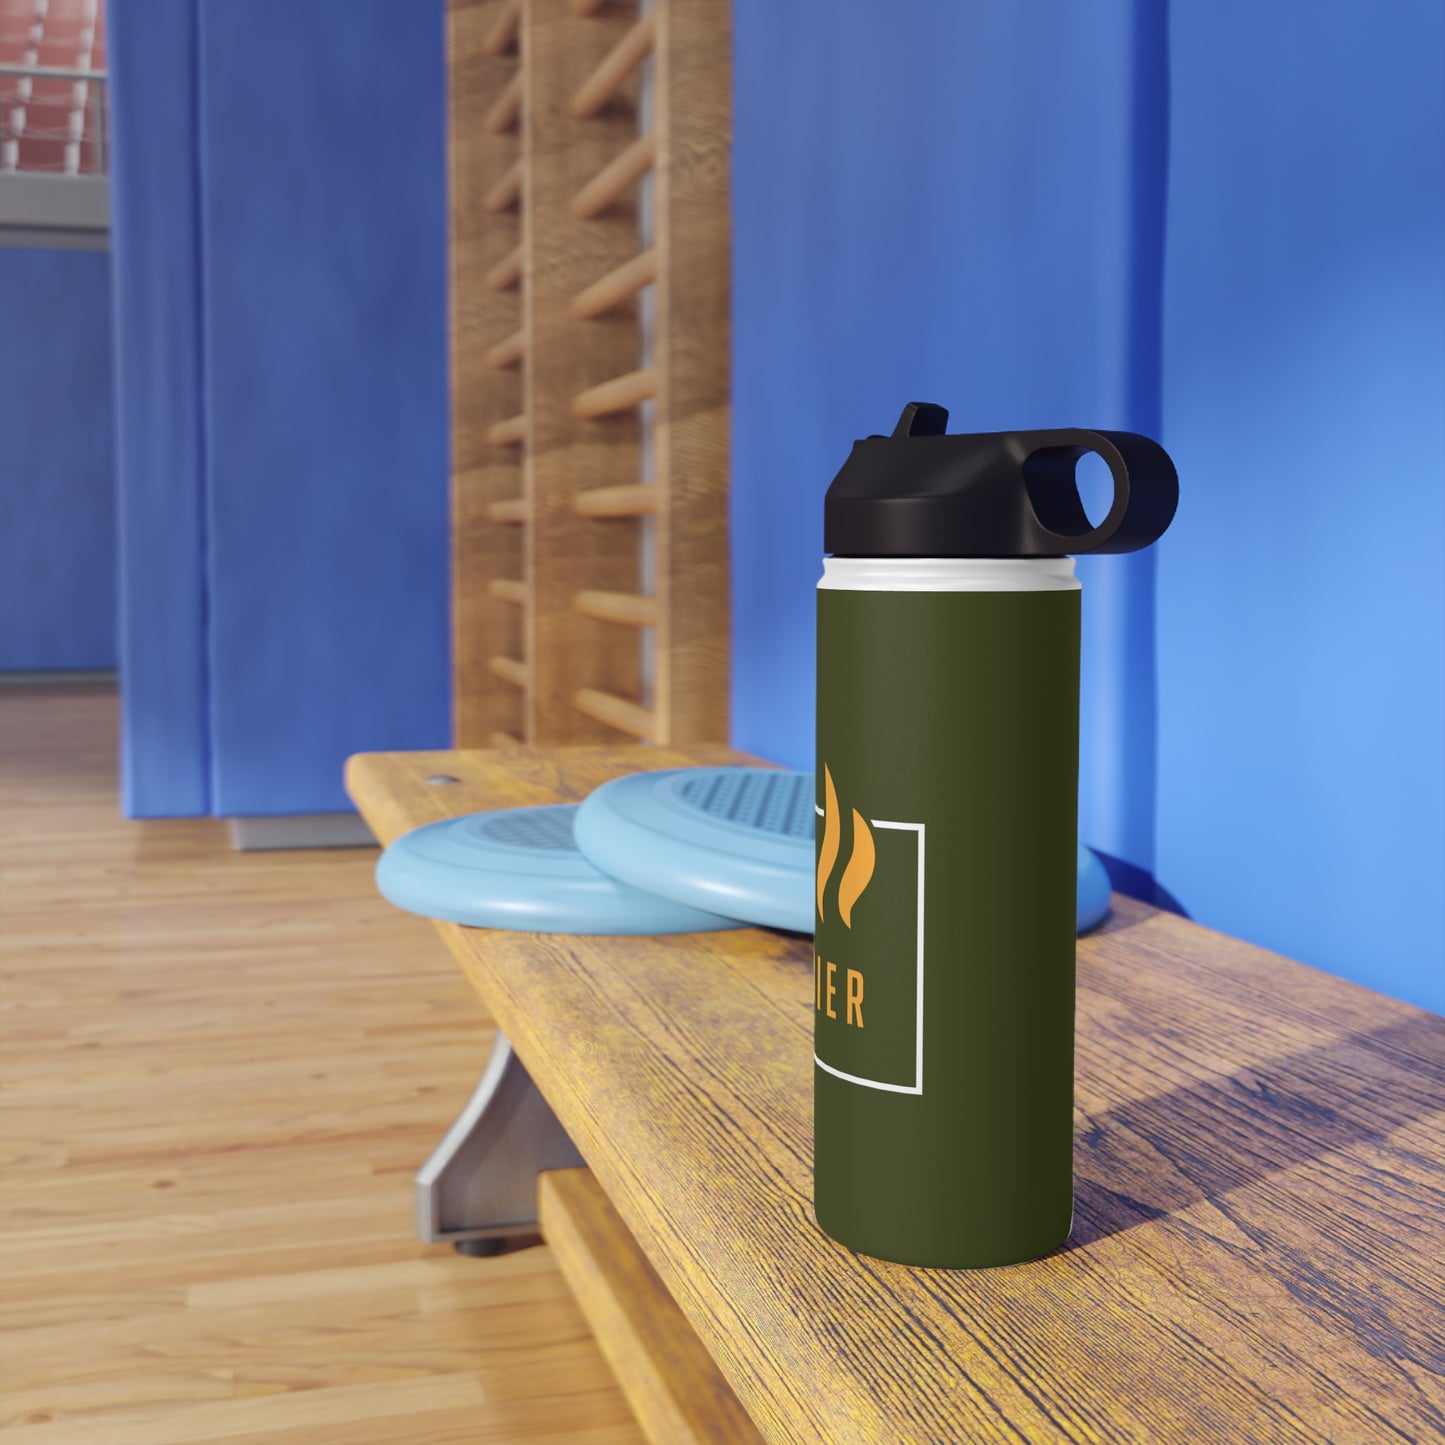 The Scented Soldier Stainless Steel Water Bottle, Standard Lid